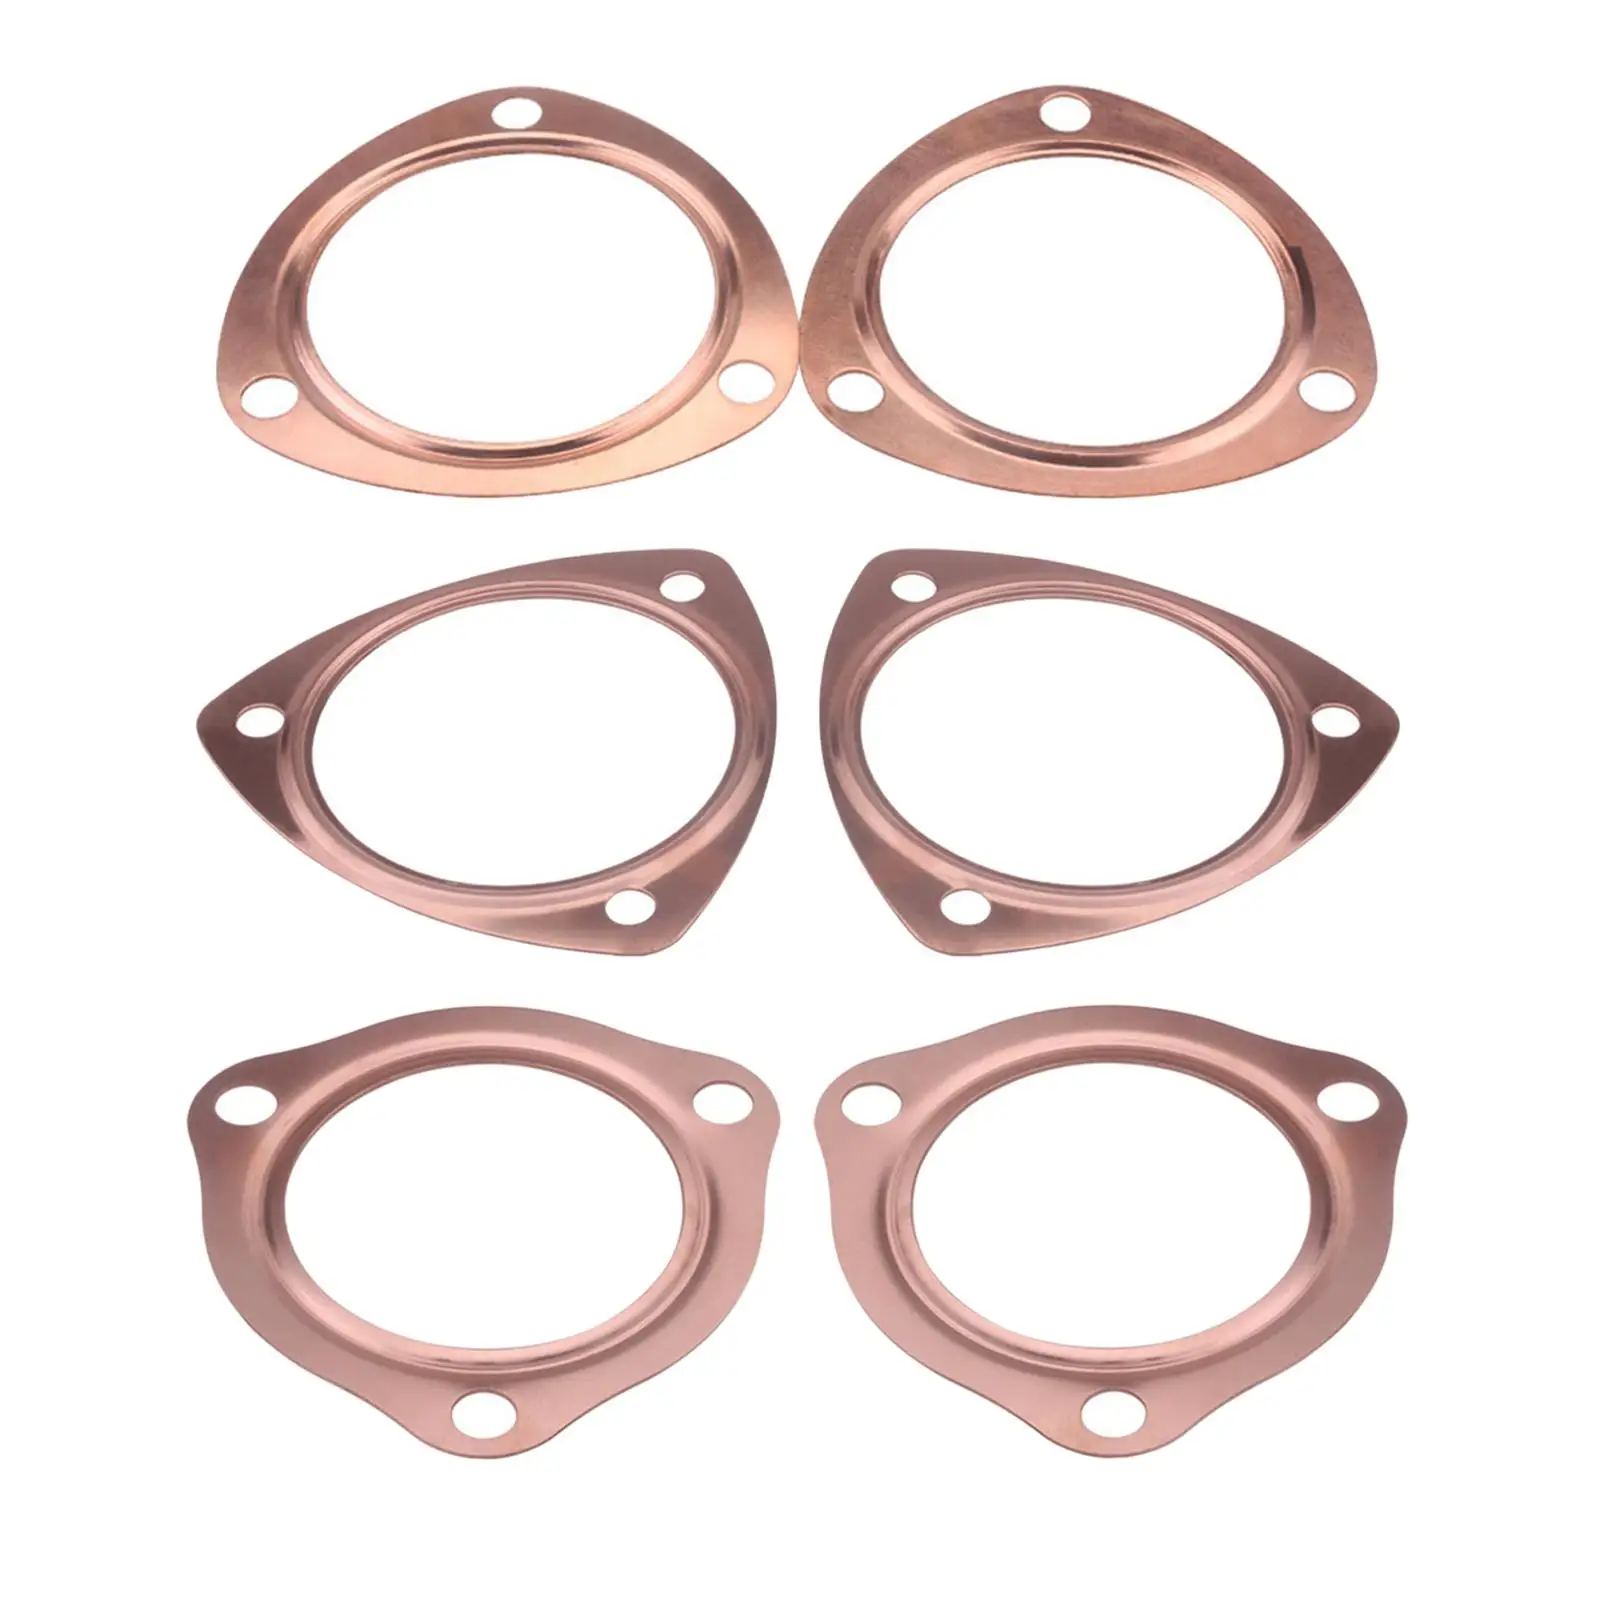 Header Collector Gaskets Anti Strike for Sbc Bbc 302 350 454 Automotive